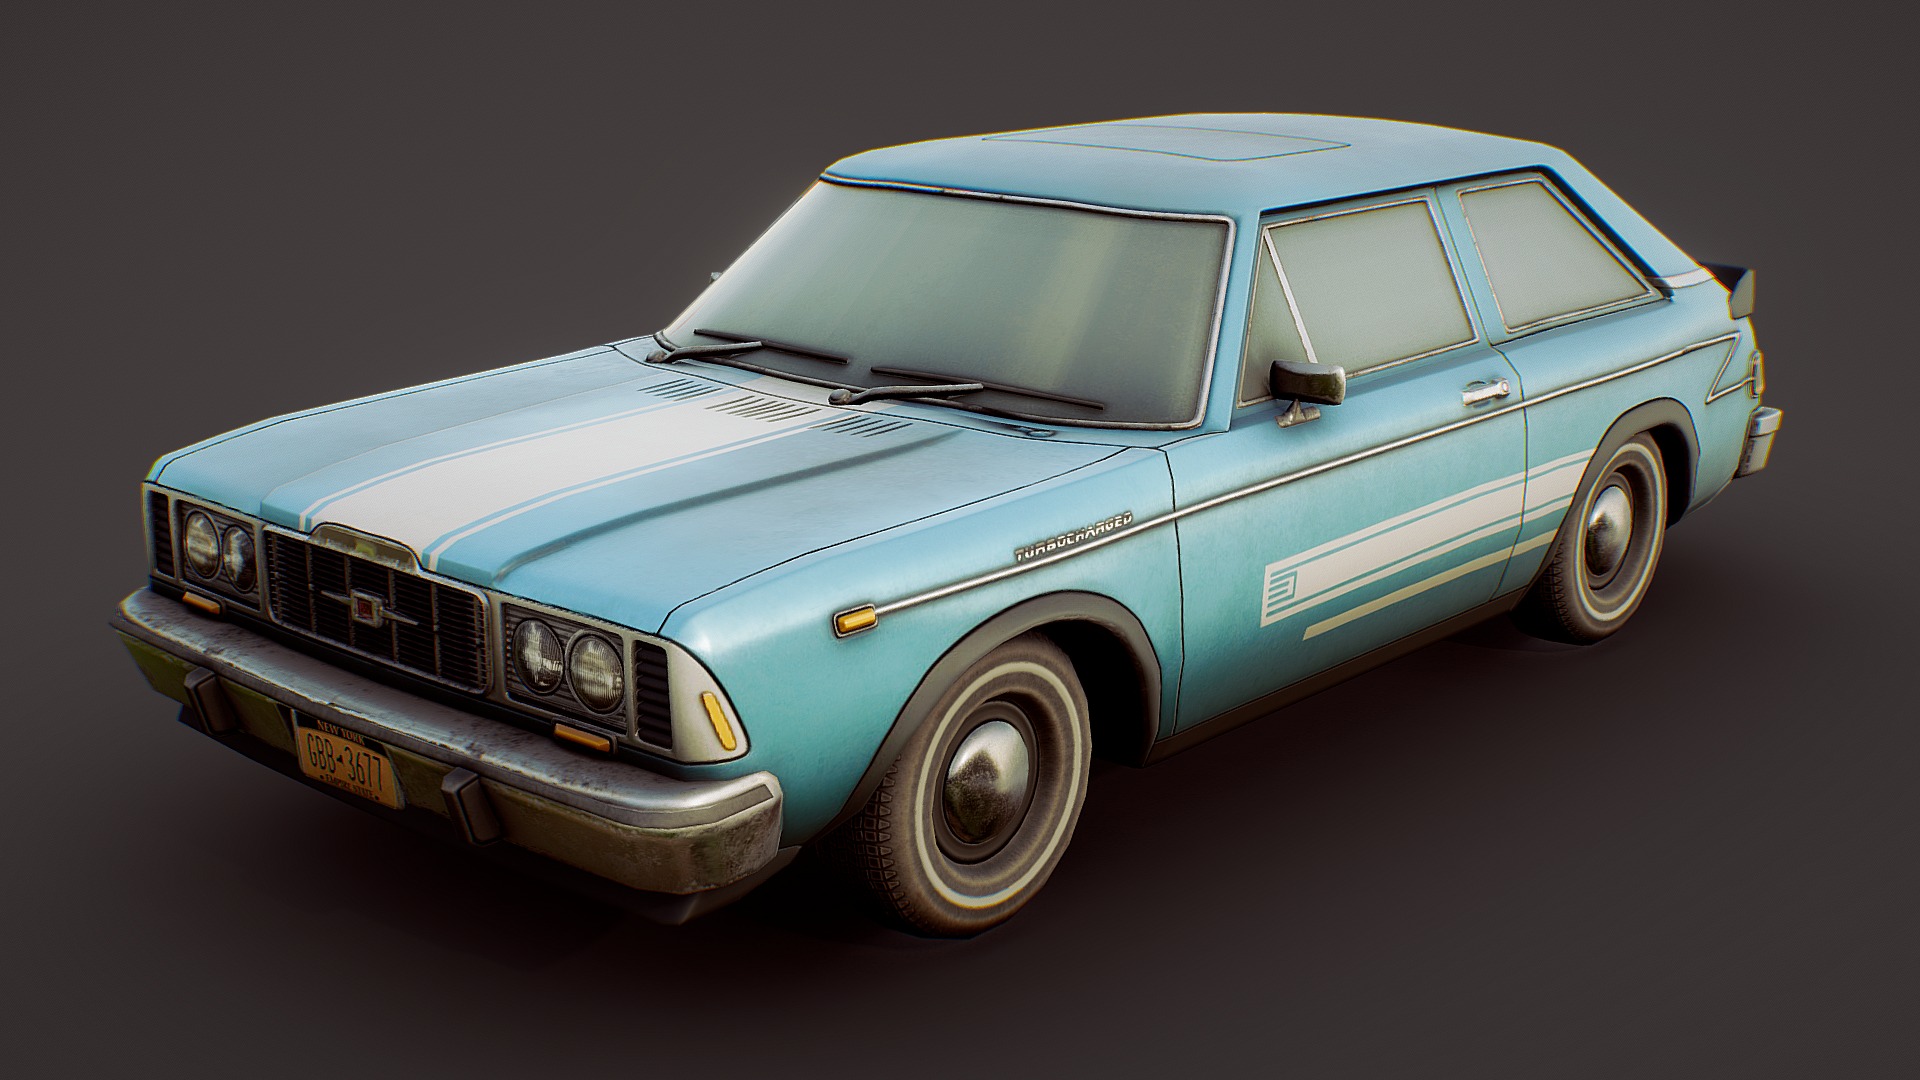 3D model 1970’s Hot Hatchback - This is a 3D model of the 1970's Hot Hatchback. The 3D model is about a blue car with a hood.